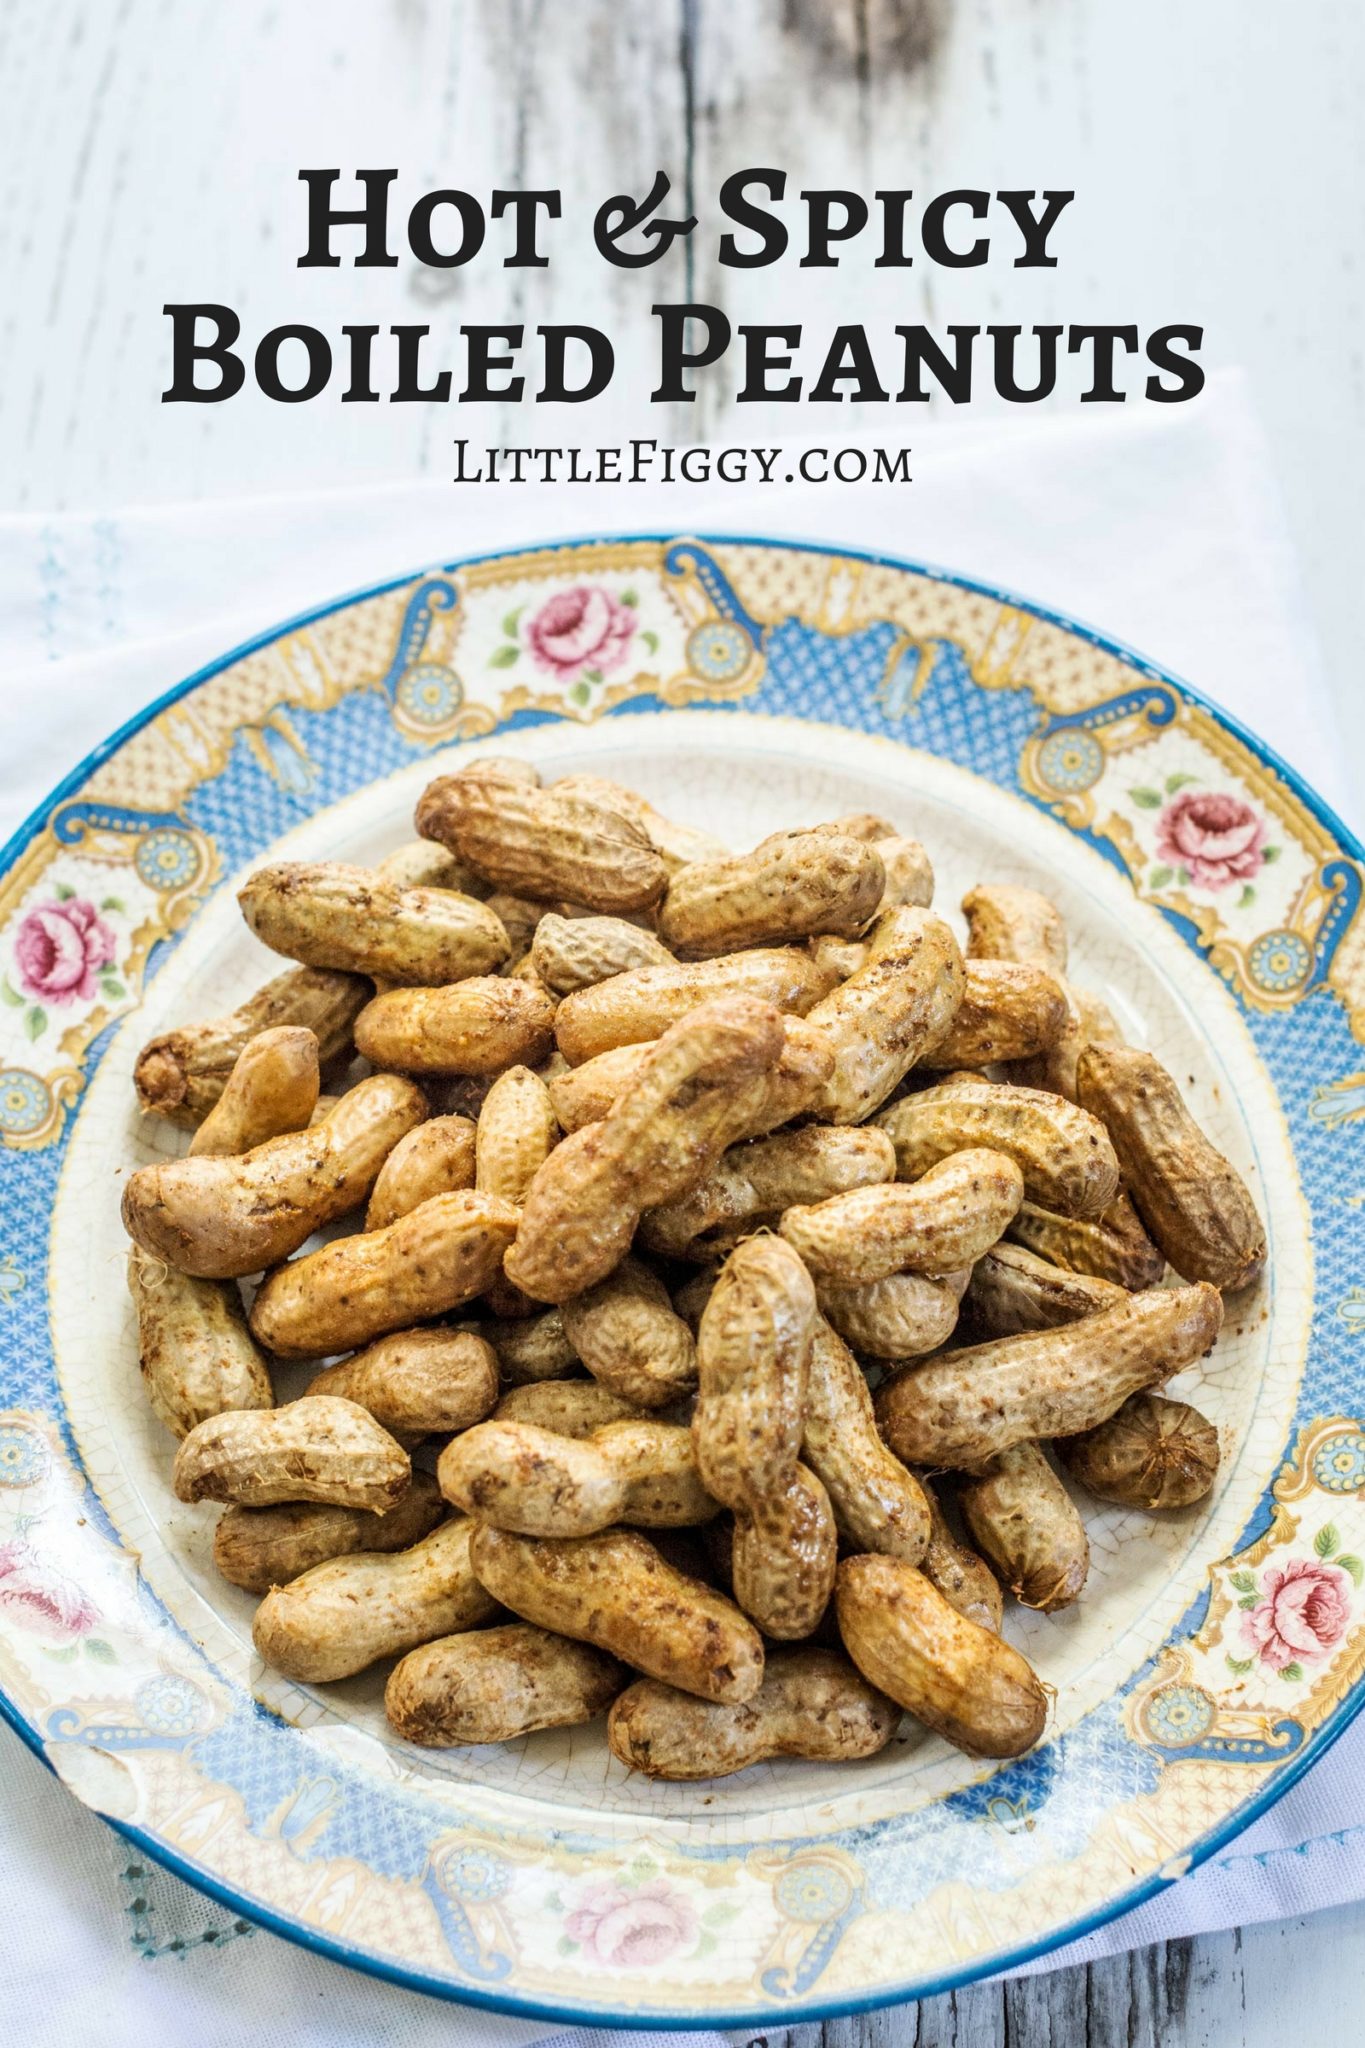 So full of flavor and easy to make, southern Hot & Spicy Boiled Peanuts! Get the recipe at Little Figgy Food